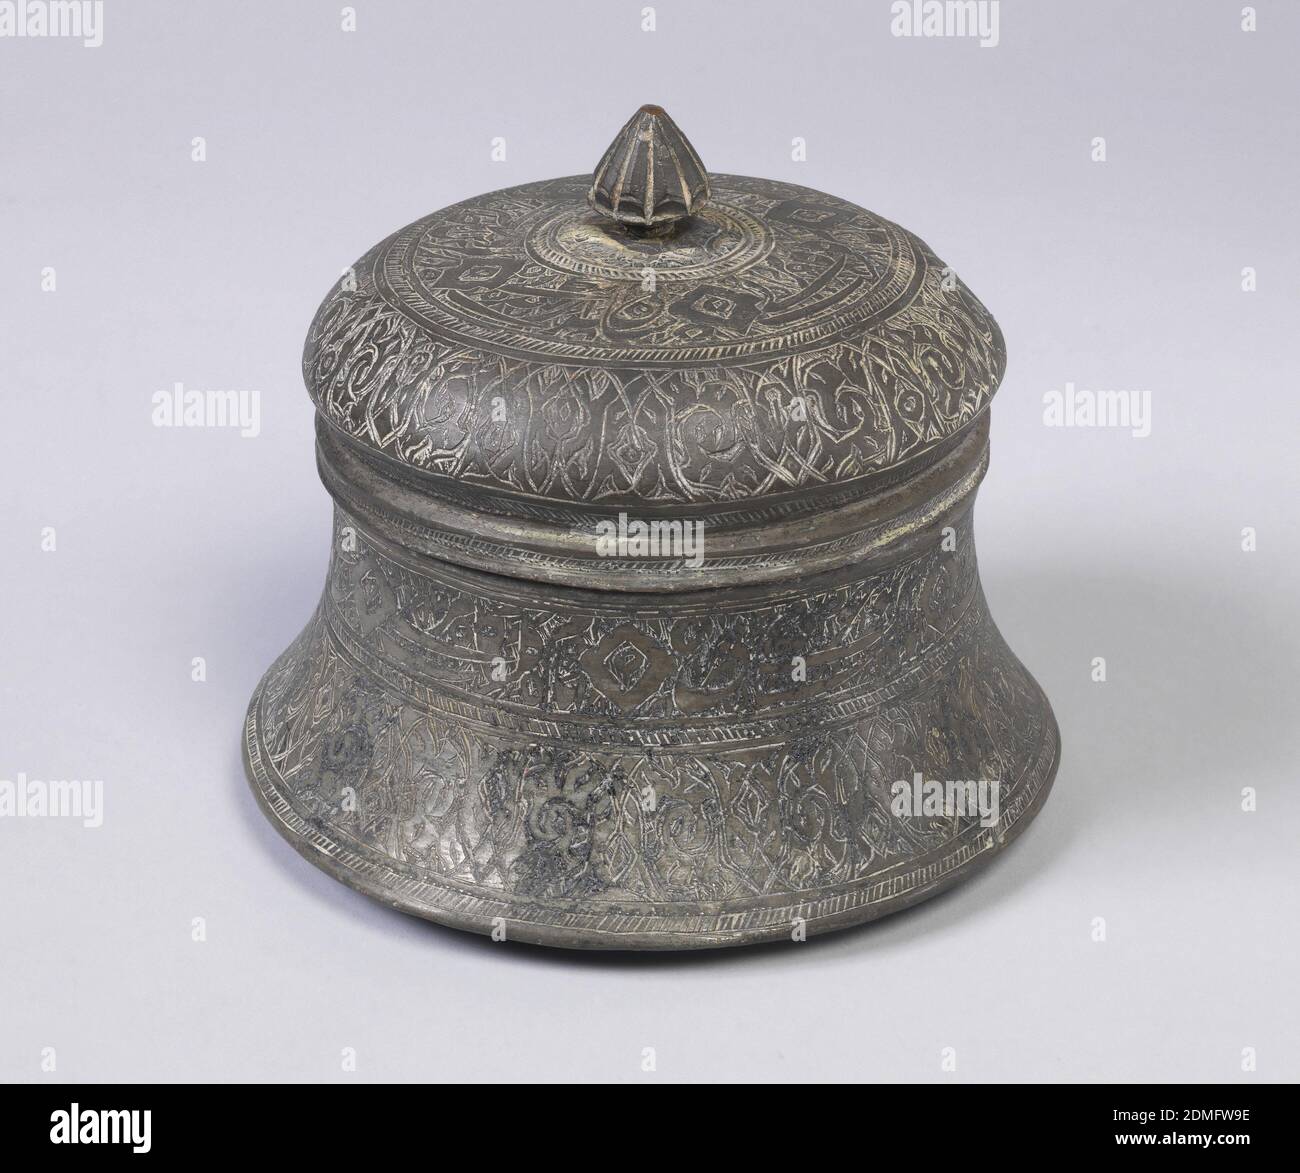 https://c8.alamy.com/comp/2DMFW9E/lidded-bowl-tinned-and-engraved-copper-bowl-with-lid-campaniform-lid-surmounted-by-a-paneled-pointed-mushroom-shaped-knob-body-and-cover-decorated-with-wide-engraved-bands-of-inscription-bounded-by-narrower-bandings-of-diagonal-lines-19th-century-metalwork-decorative-arts-lidded-bowl-2DMFW9E.jpg